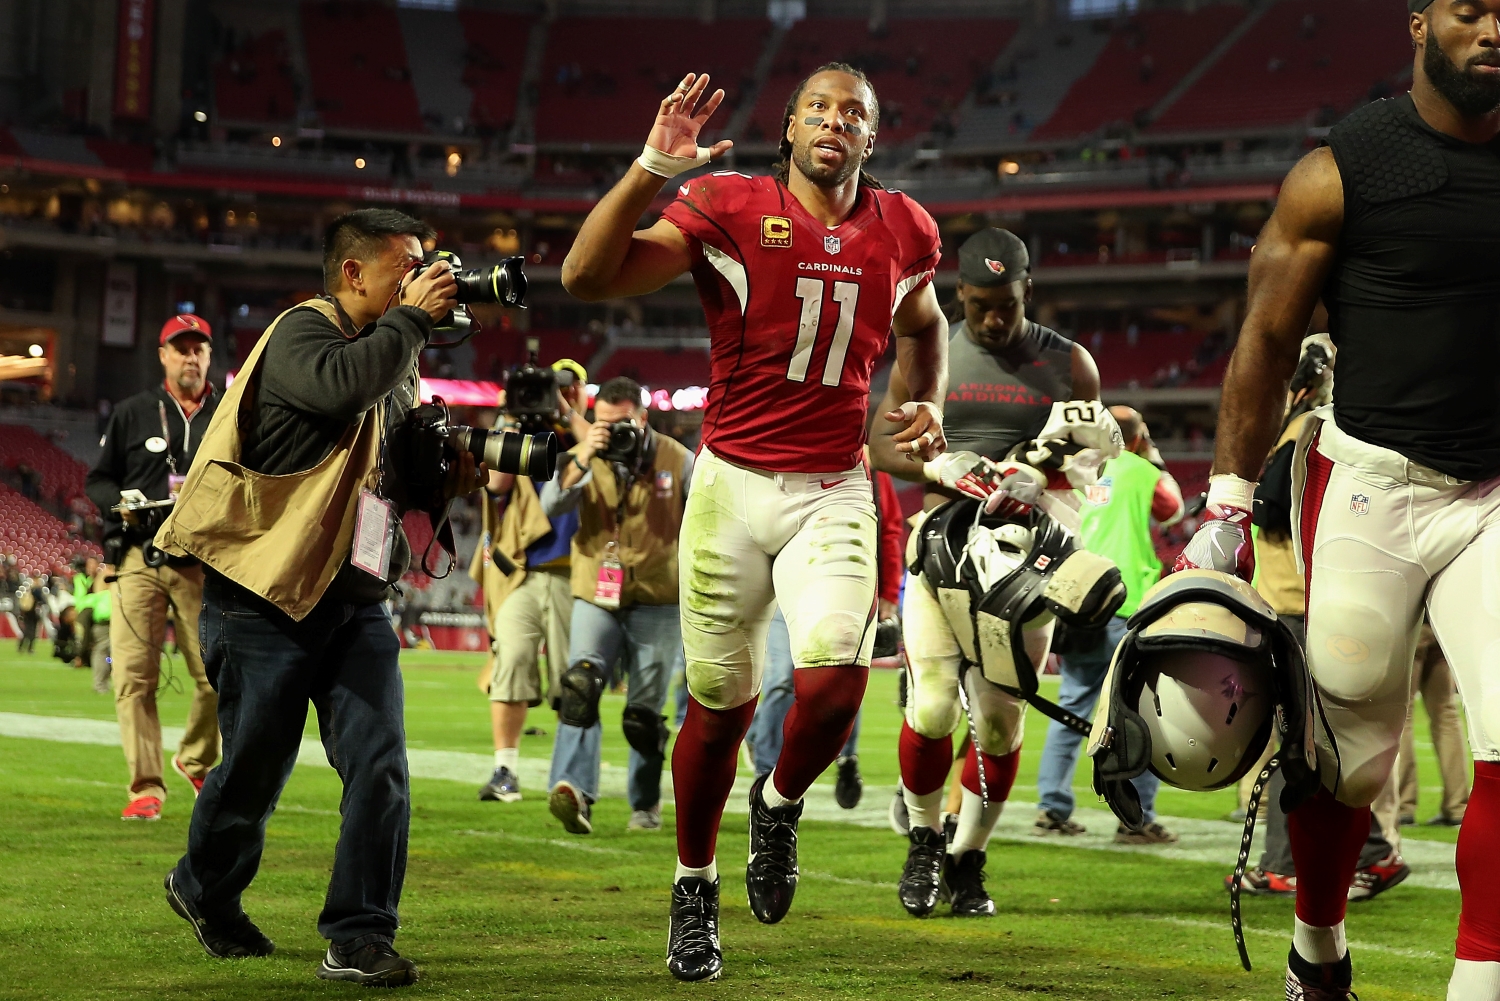 Arizona Cardinals wide receiver Larry Fitzgerald waves to fans as he jogs off the field.